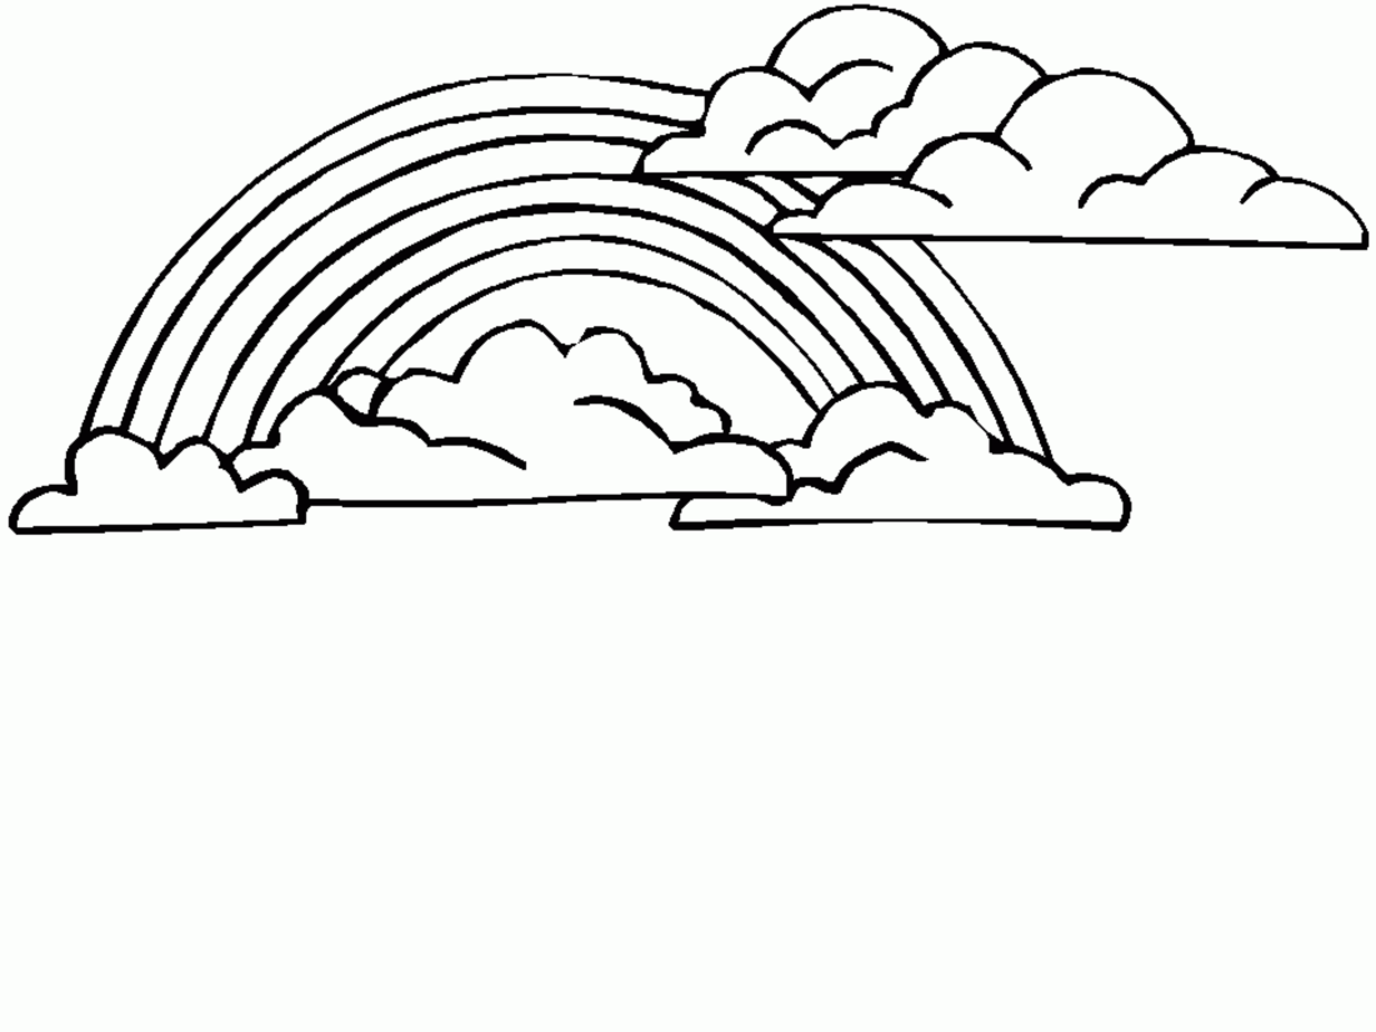 Black And White Rainbow Coloring Page - Coloring Home